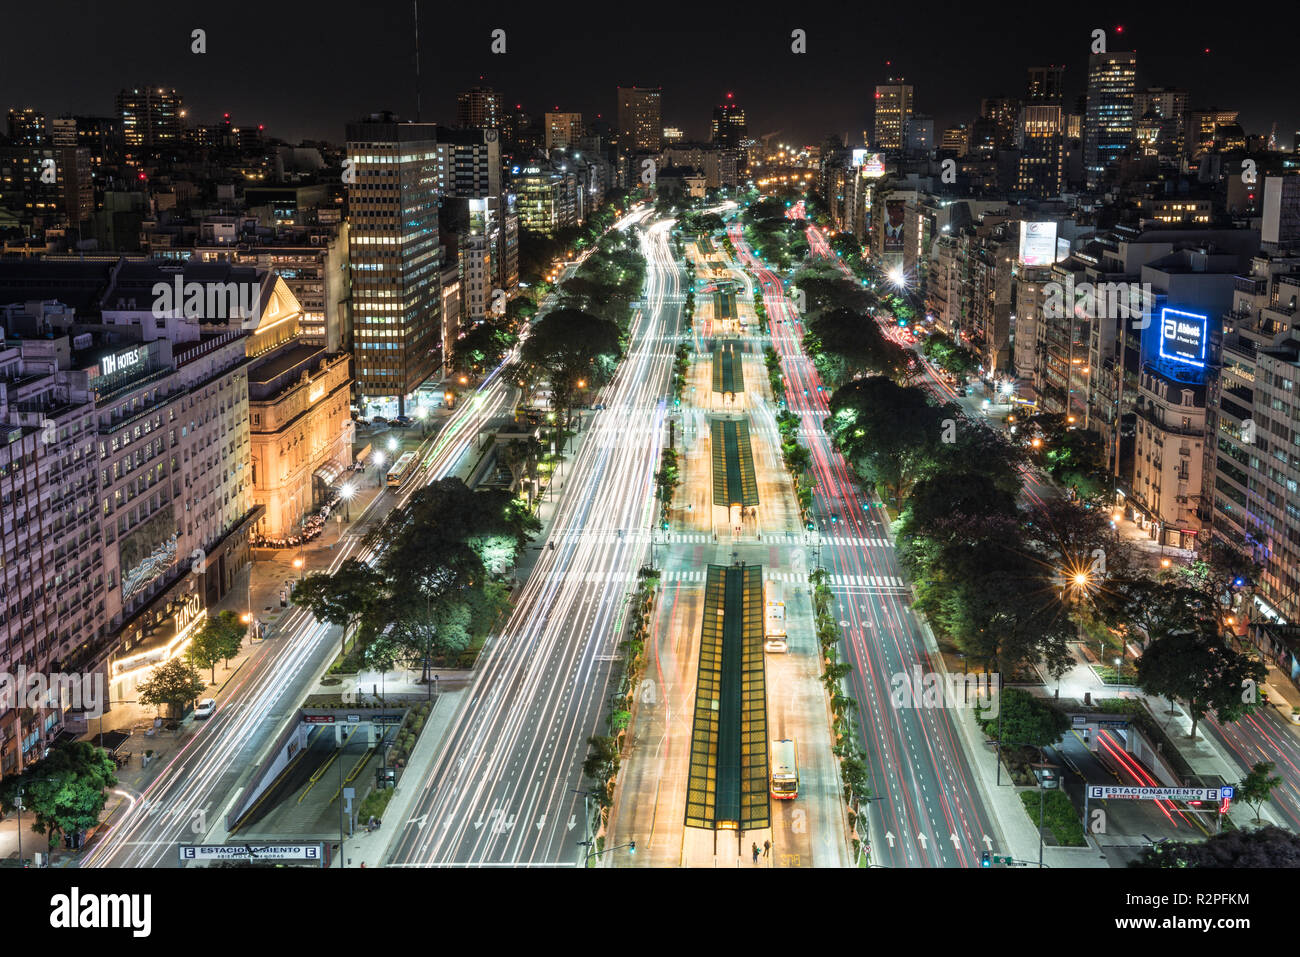 Buenos Aires, Argentina - May 4 2015: Rush hour and traffic on the sreets of Buenos Aires city. This photo shows the 9 de Julio Avenue. Stock Photo